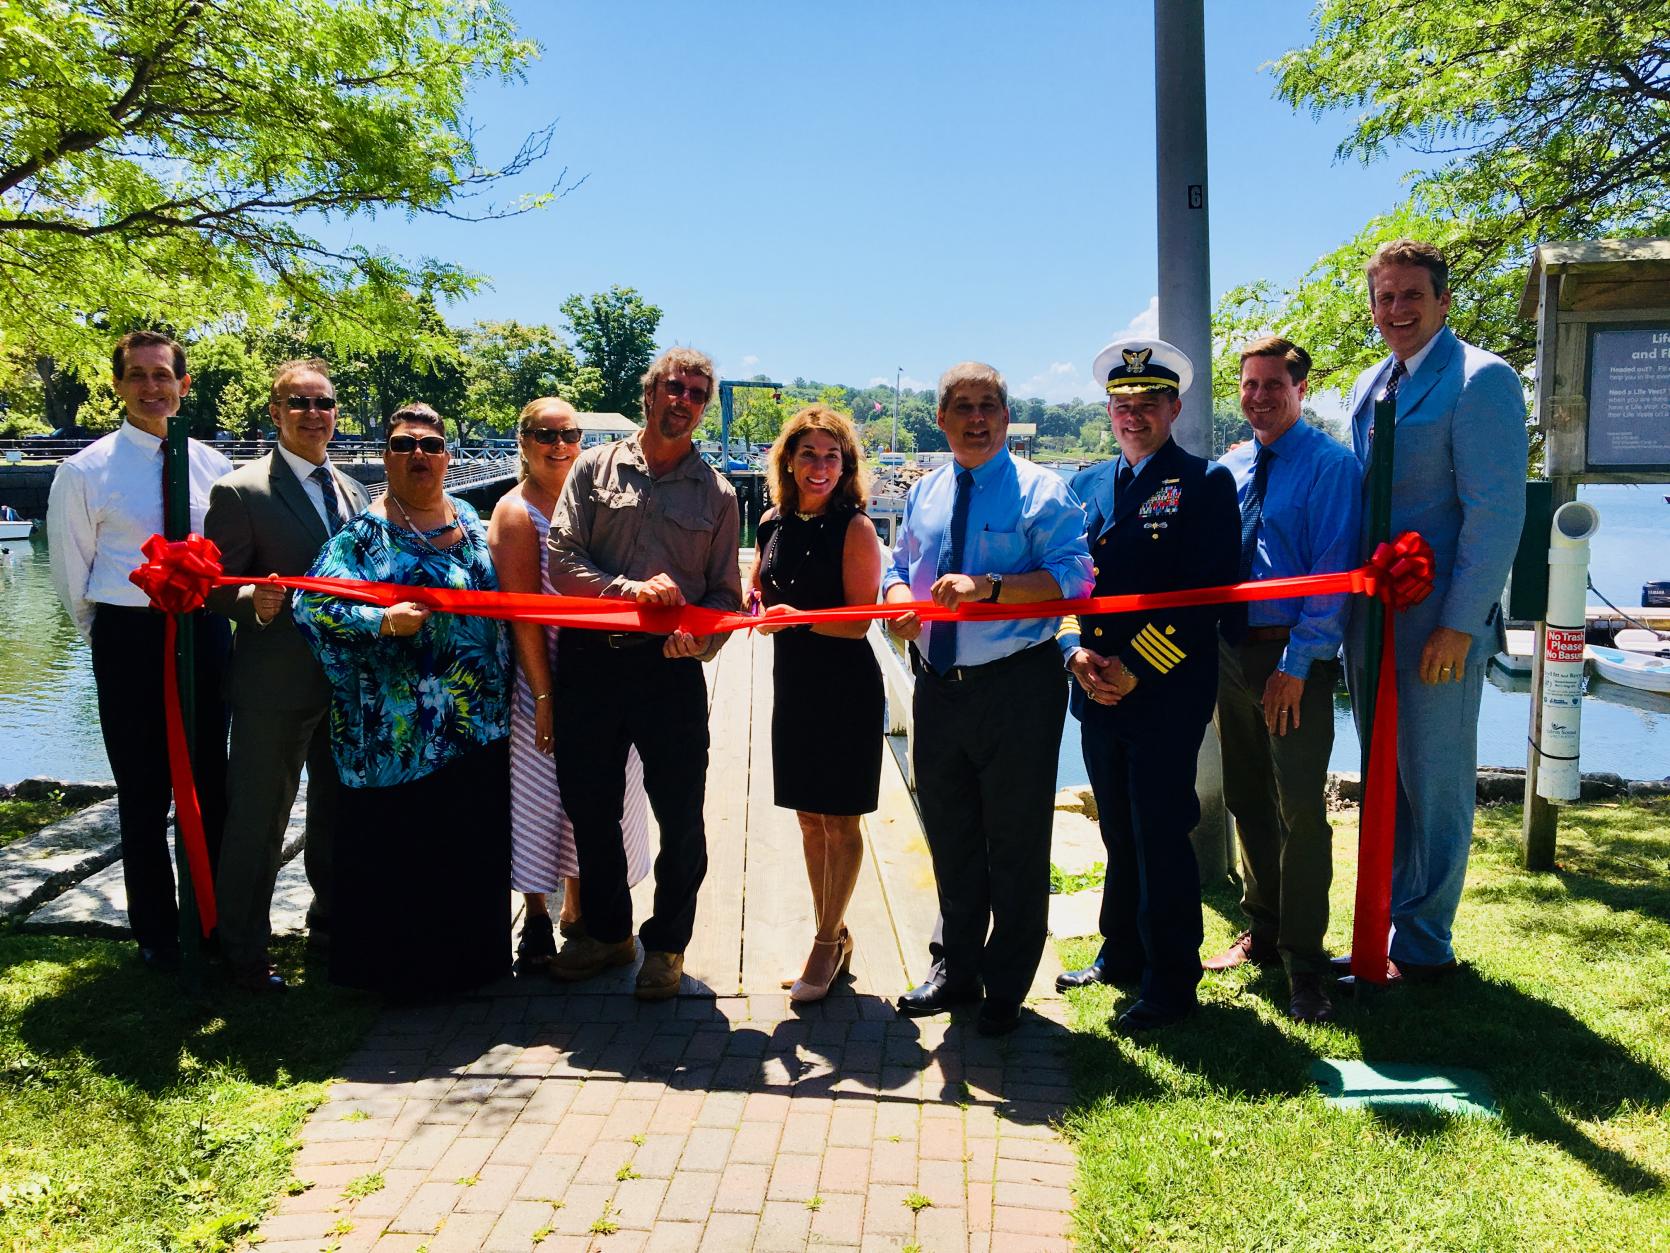 Lt. Governor Karyn Polito, center, and Housing and Economic Affairs Secretary Jay Ash, far right, attend the ribbon cutting for Manchester-by-the-Sea's dredging project.